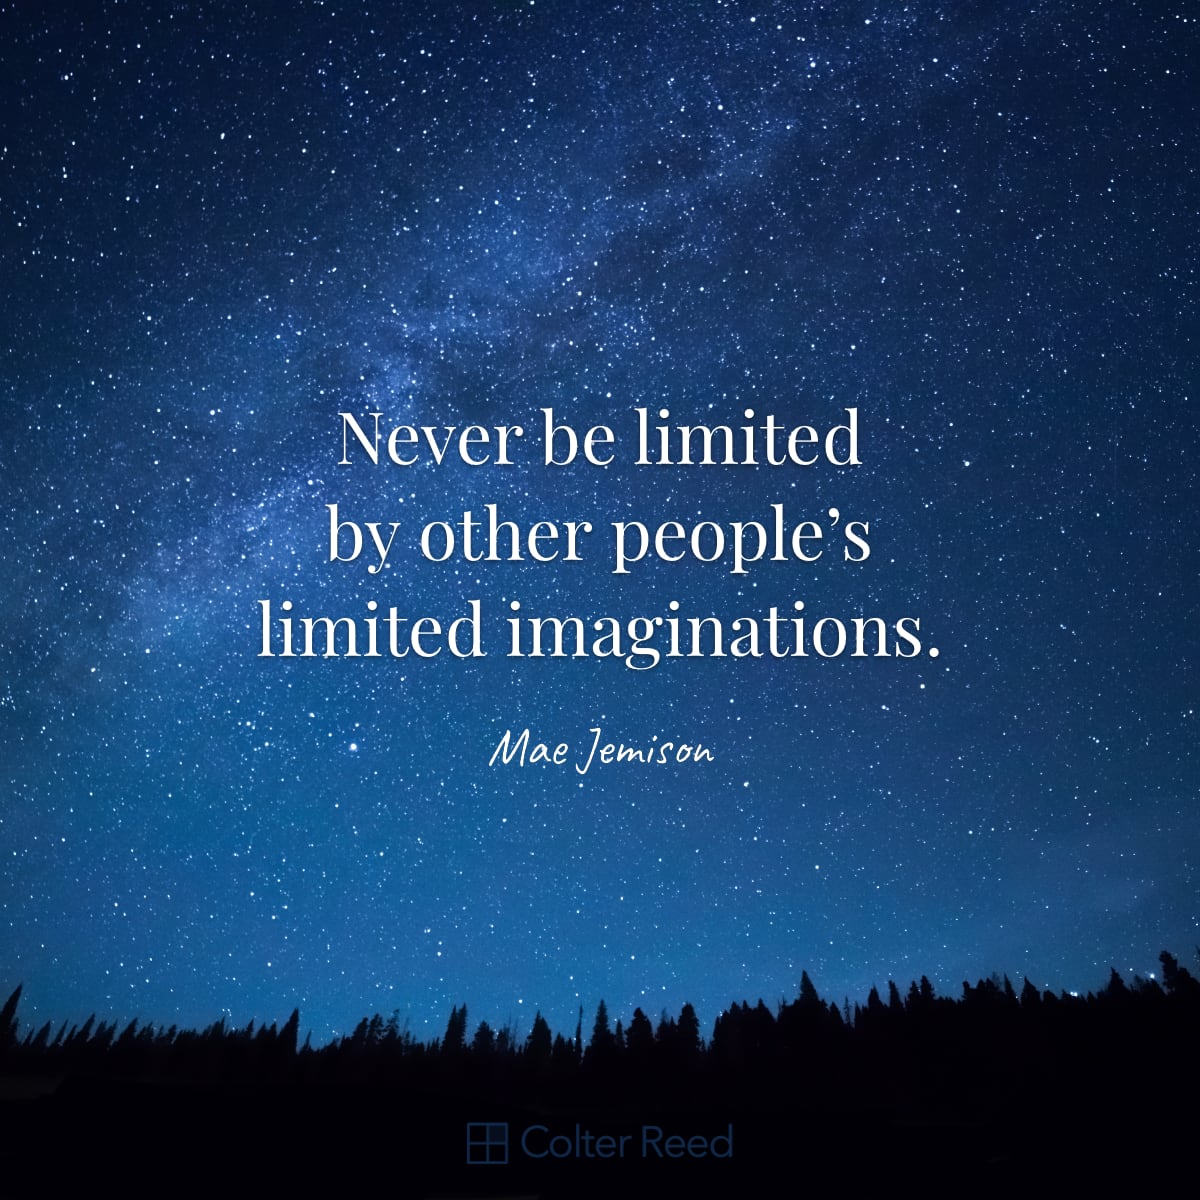 Never be limited by other people’s limited imaginations. —Mae Jemison